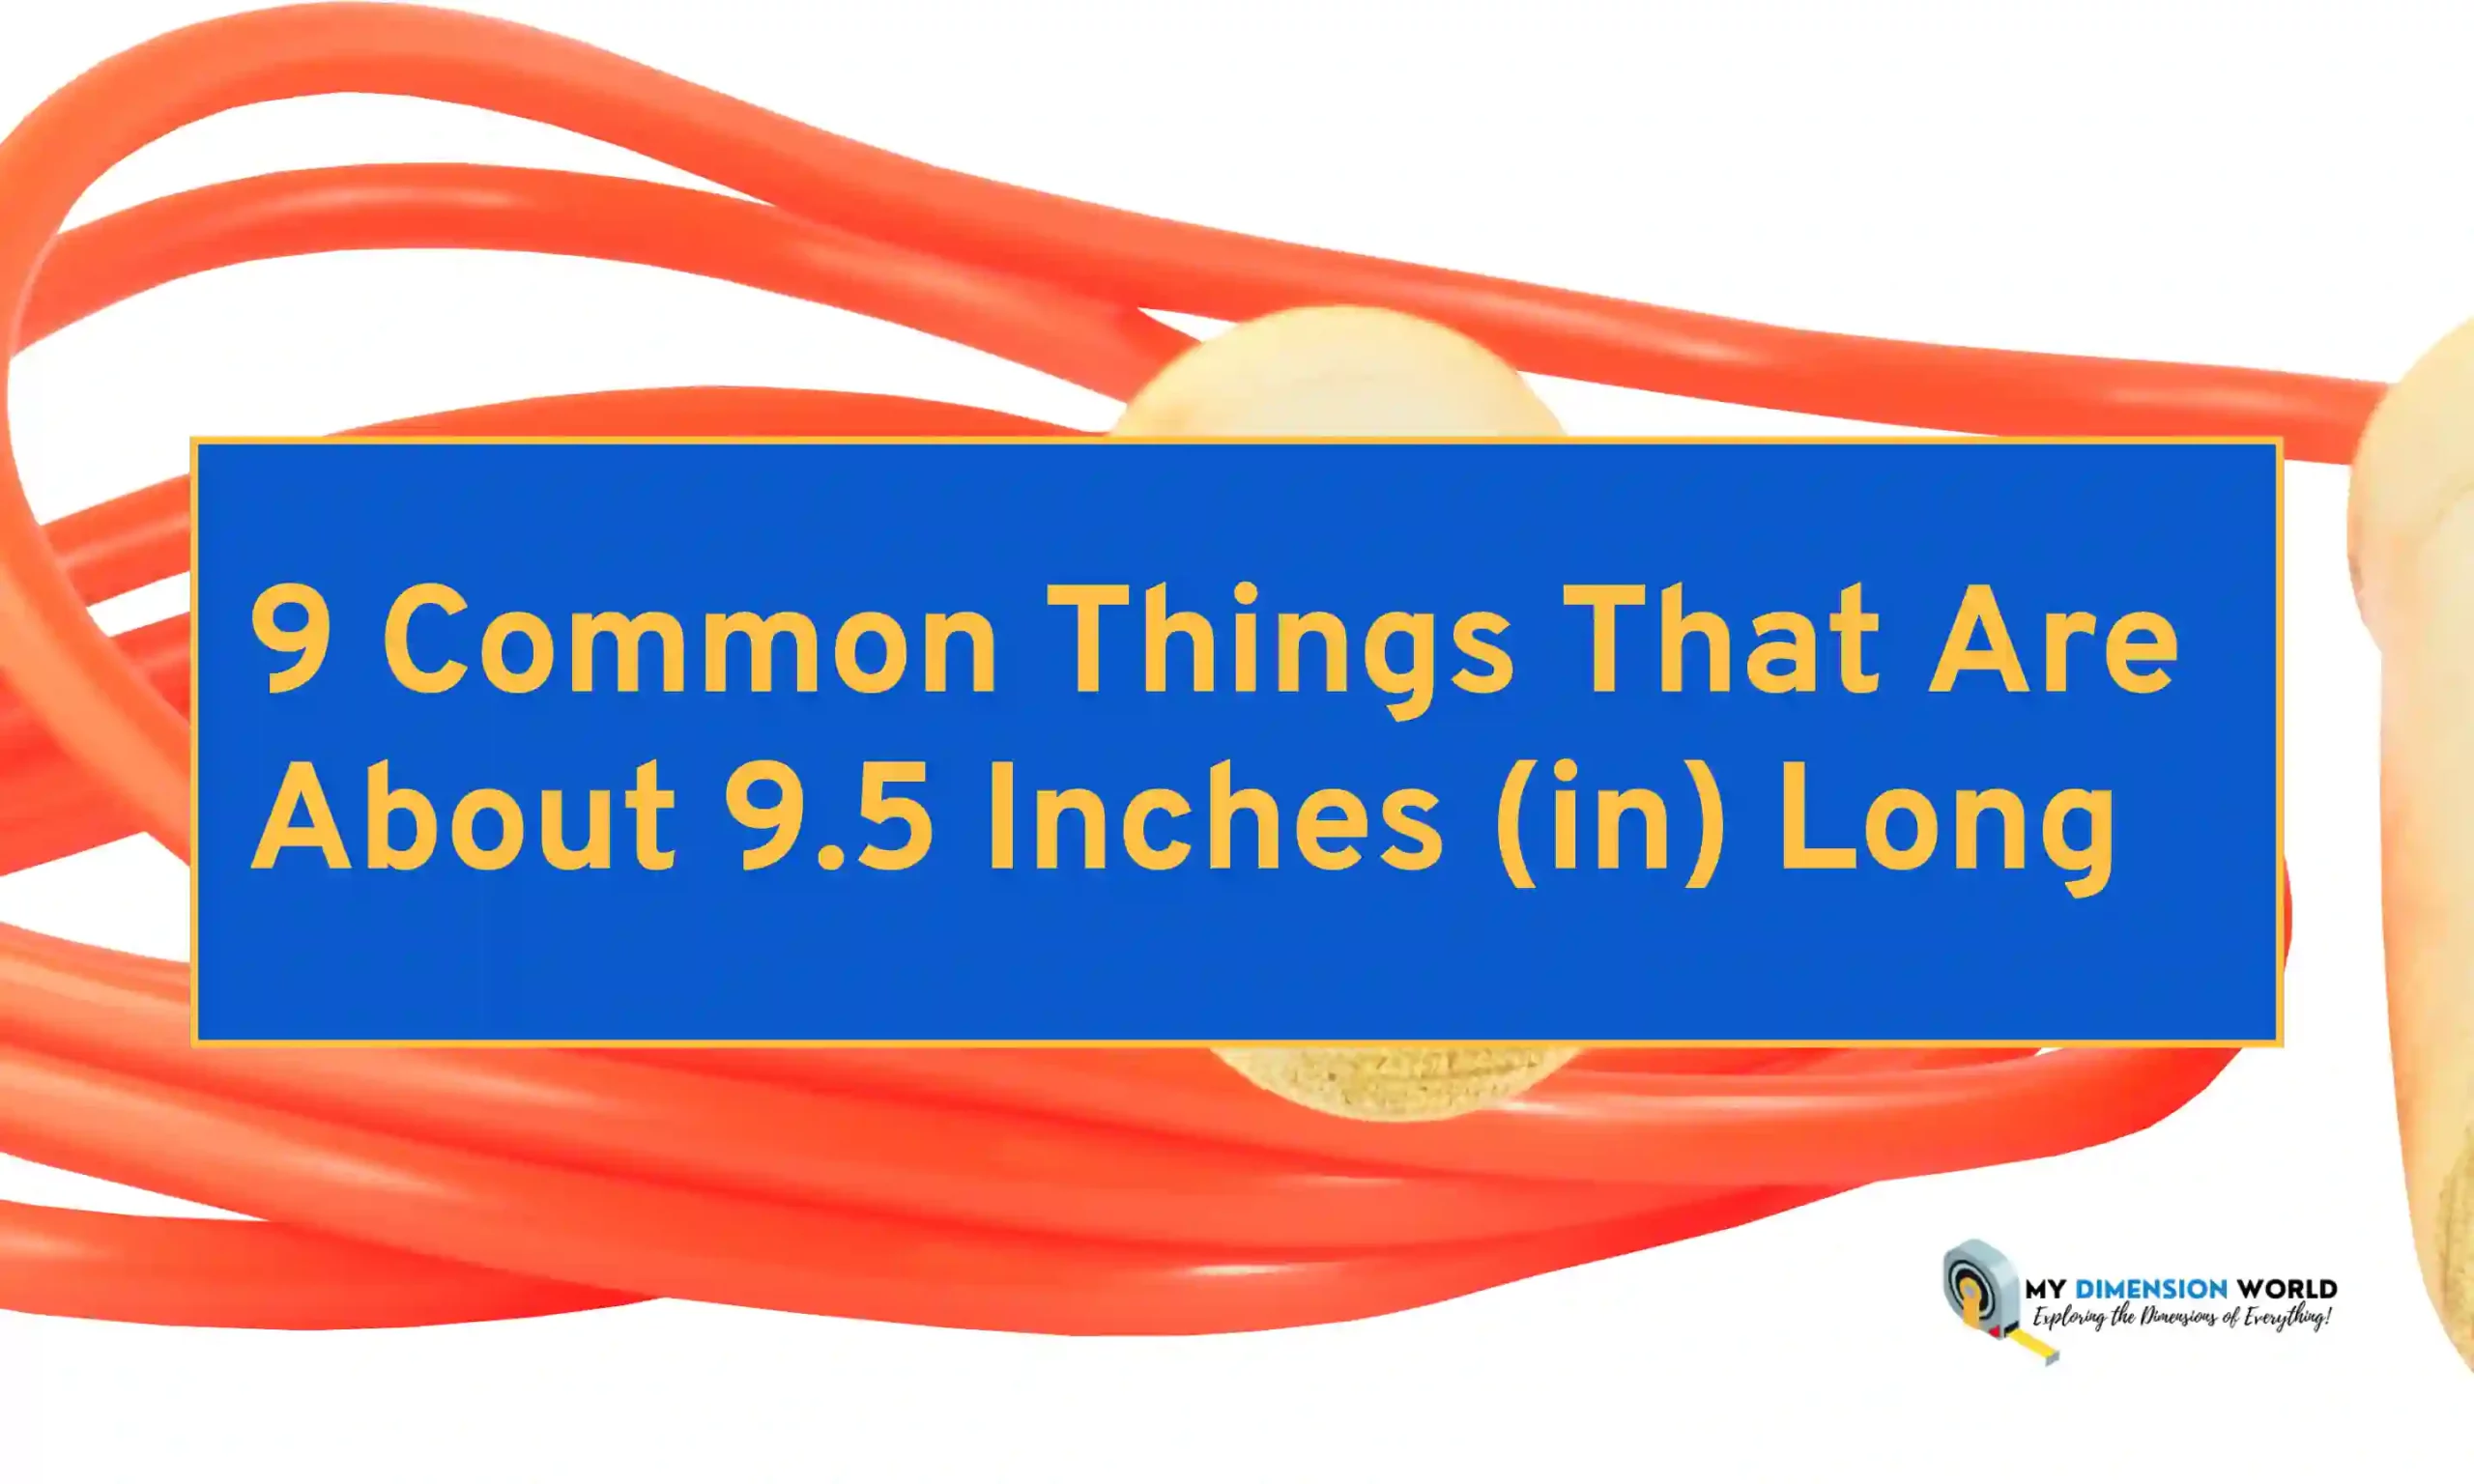 9 Common Things That Are About 9.5 Inches (in) Long